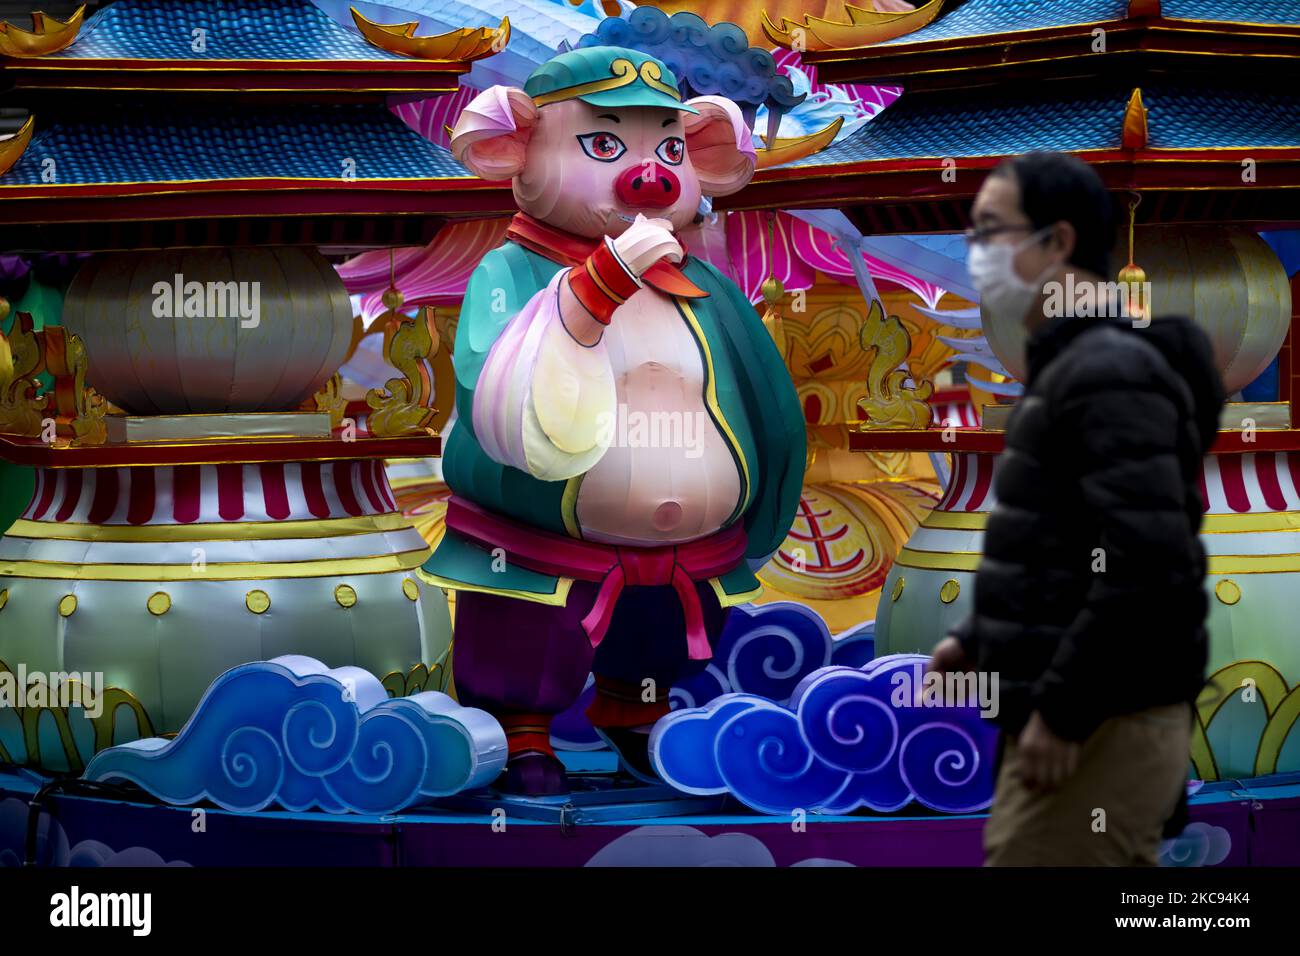 A man wearing a protective mask walks past at Lanterns featuring 'Journey to the West' are displayed at Yamashitacho Park during the lunar new year on February 12, 2021 in Yokohama, Japan. Yokohamas Chinatown, the largest in Japan, has imposed restrictions on celebrations marking lunar new year a cause of Covid-19. (Photo by Alessandro Di Ciommo/NurPhoto) Stock Photo